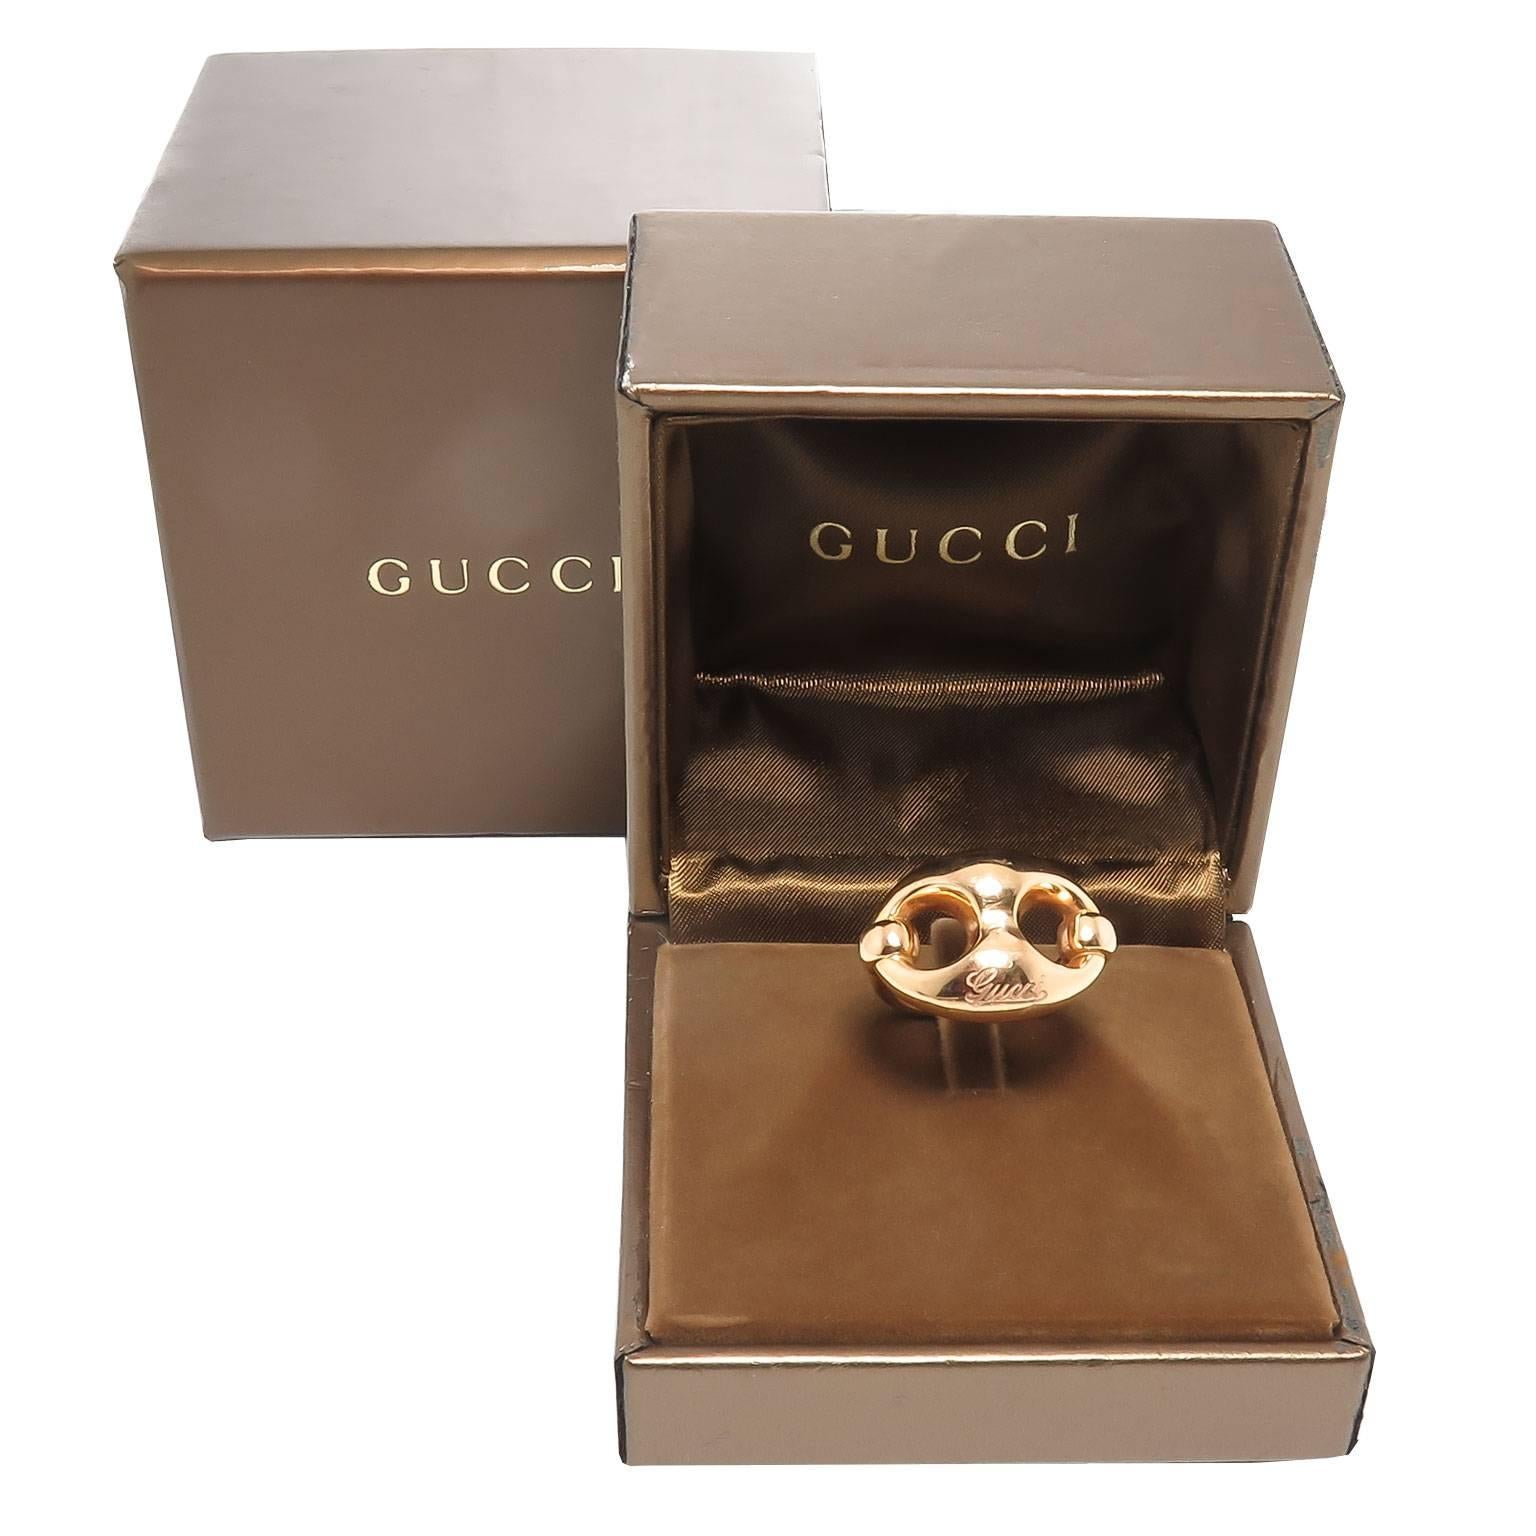 Circa 2010 Gucci 18K Yellow Gold Horse Bit Ring. Measuring 1 inch across the top and weighing 15 Grams. Comes in the original Gucci Presentation box.